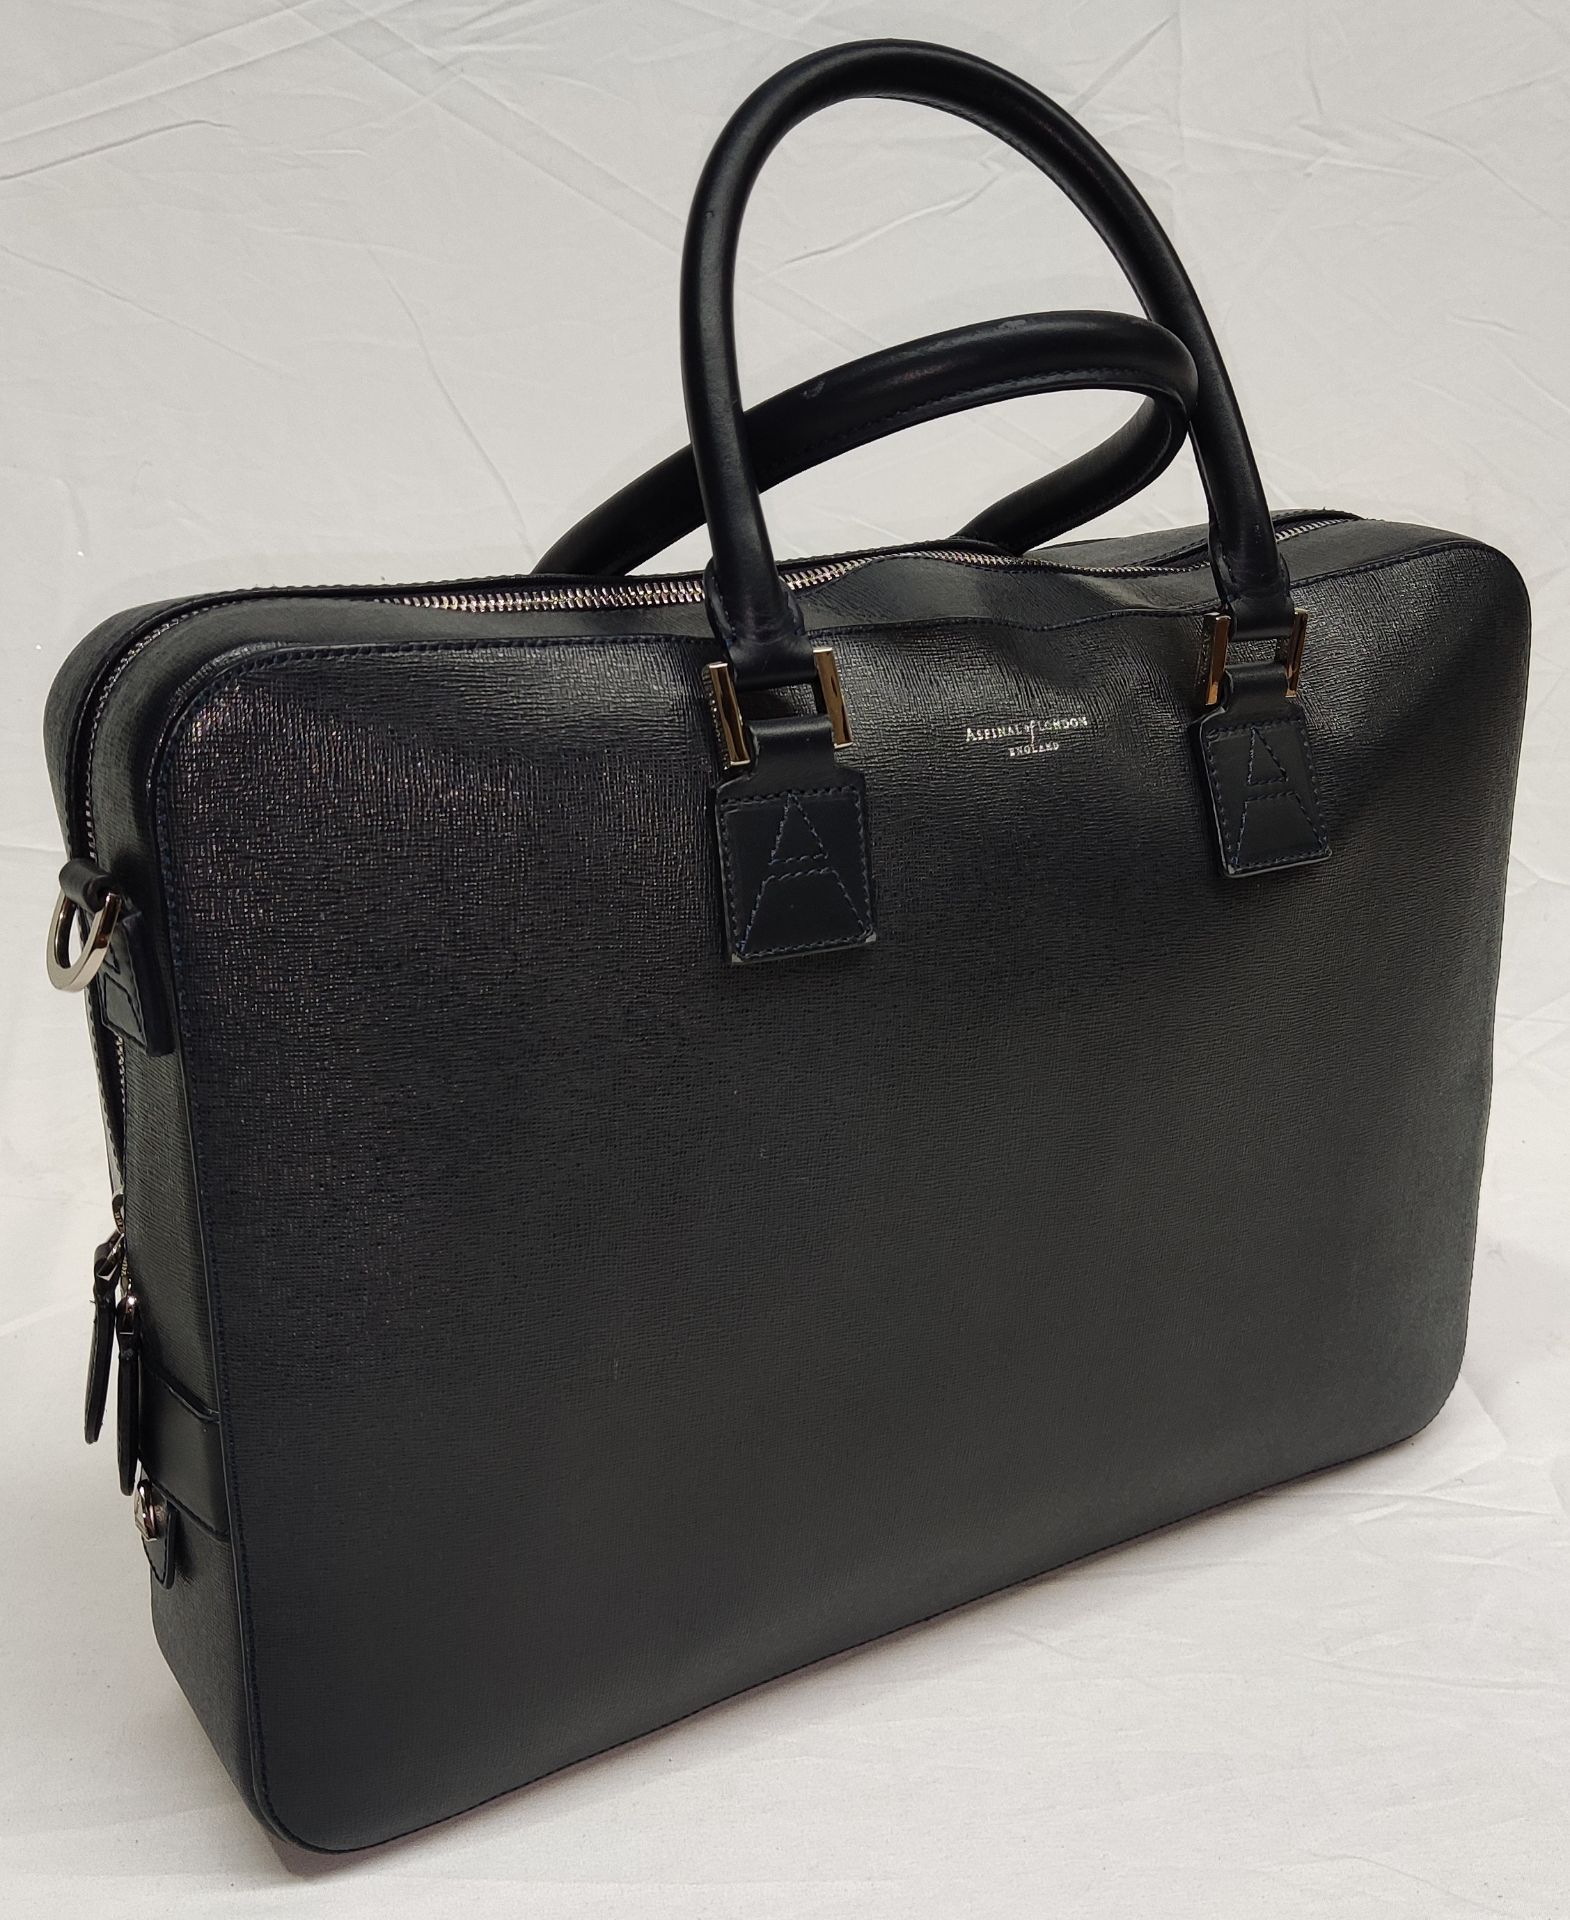 1 x ASPINAL OF LONDON Mount Street Small Laptop Bag In Black Saffiano - Original RRP £650.00 - Image 5 of 21